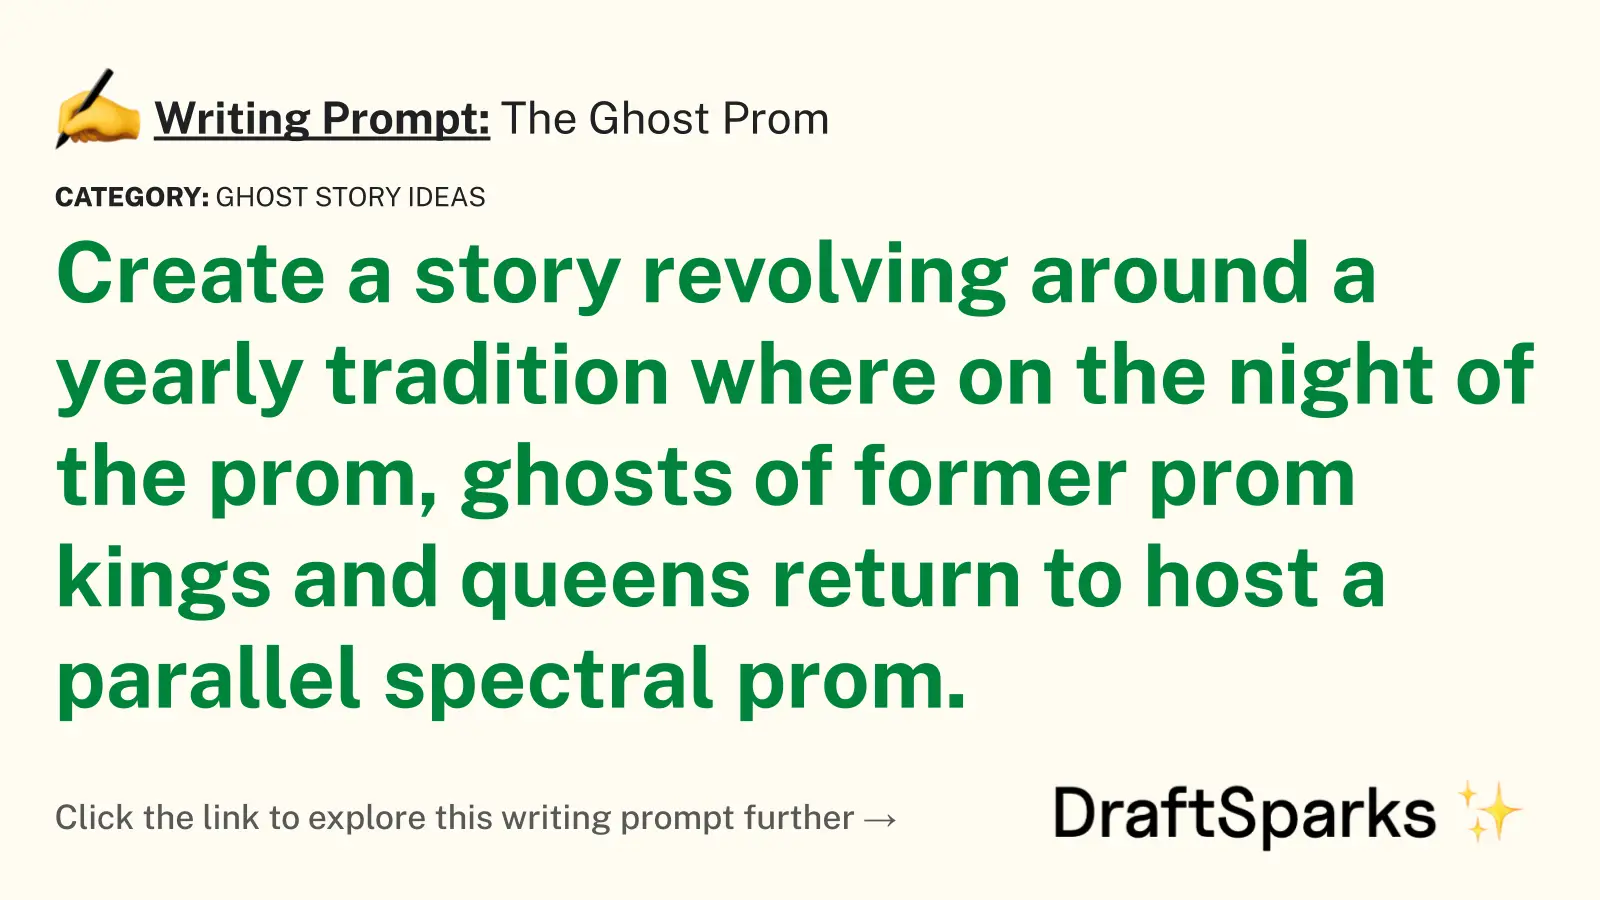 The Ghost Prom